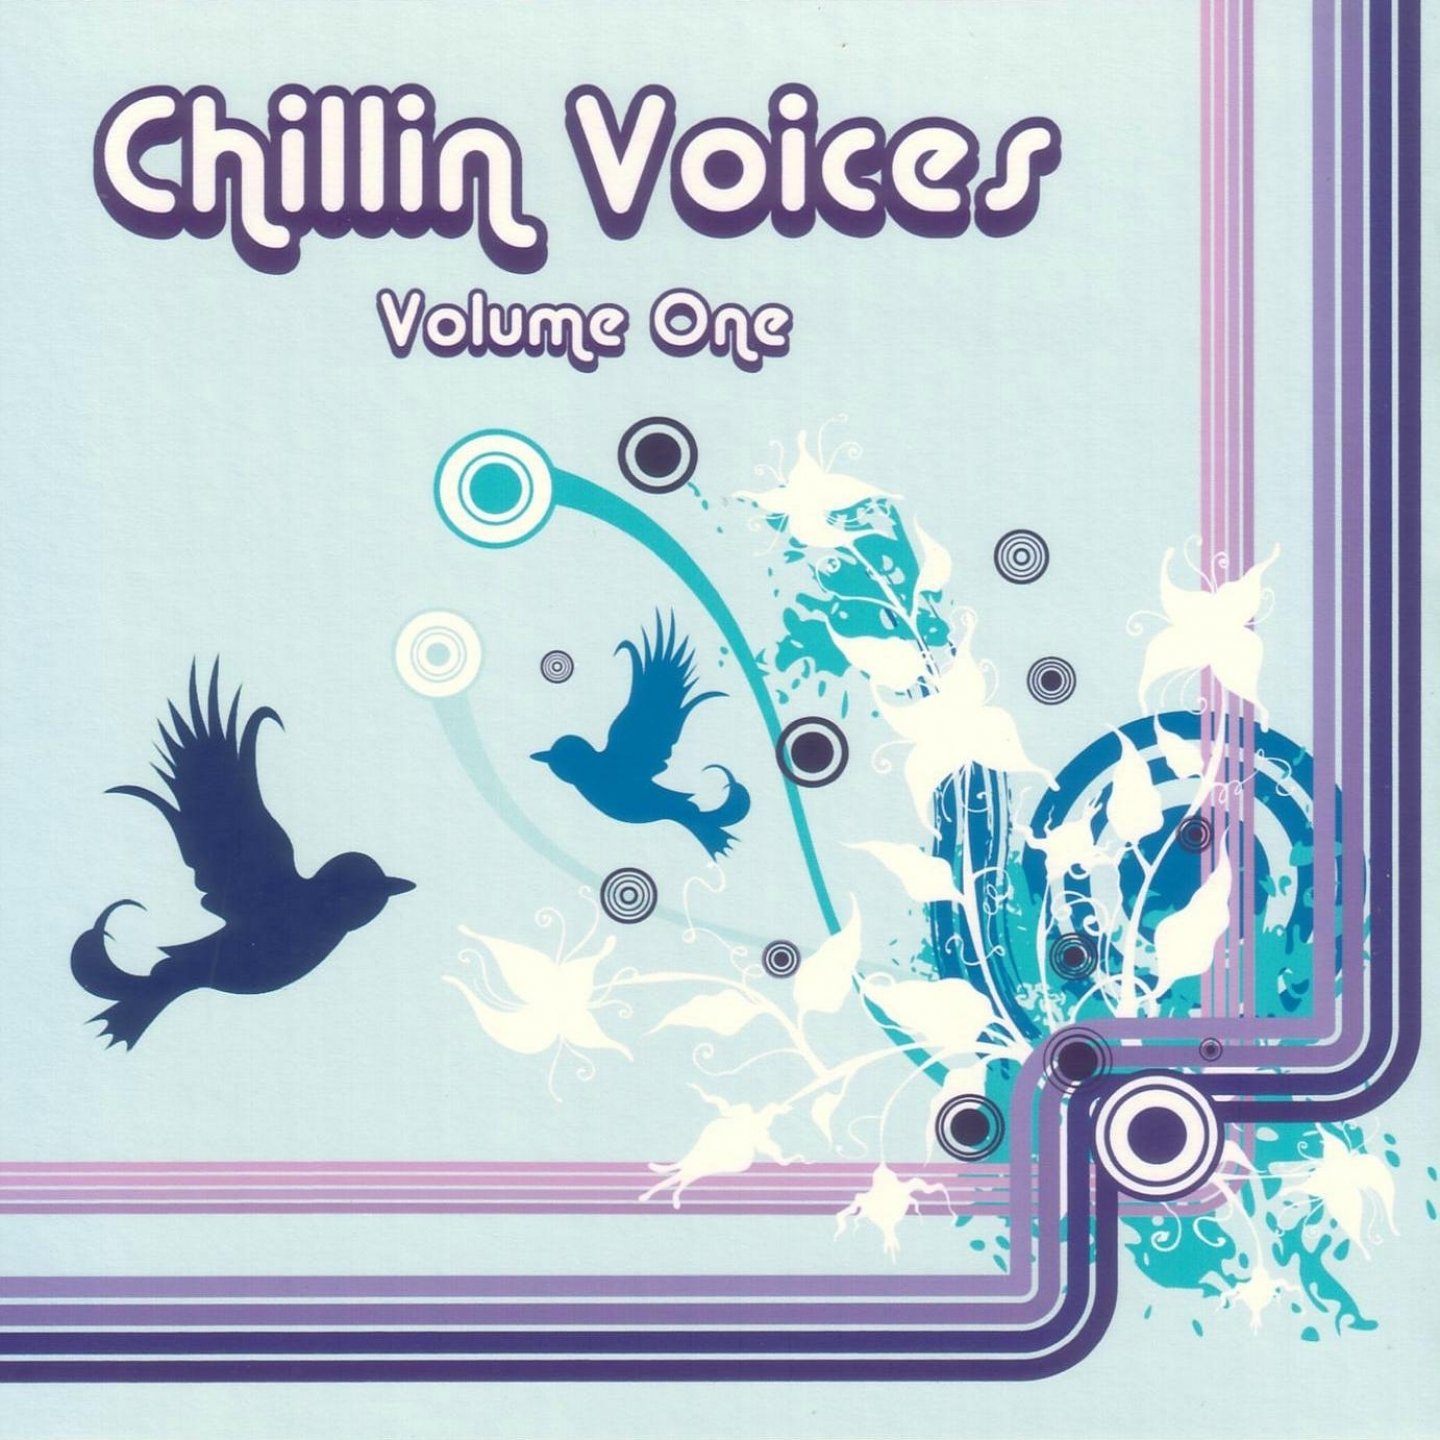 Voic. Vol 1 - Voices and instruments. Chillin.